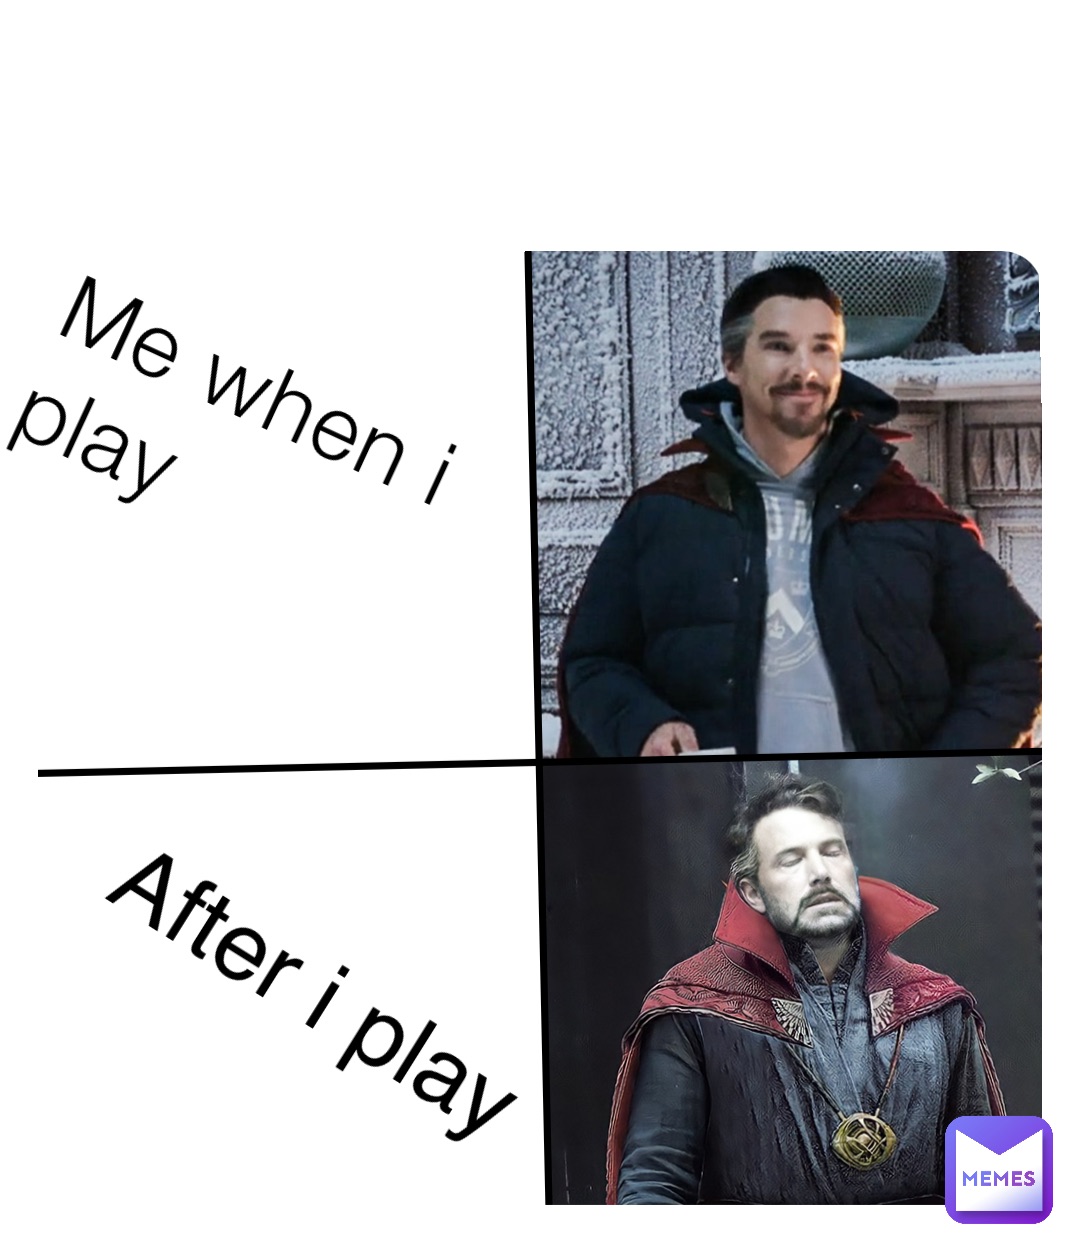 Me when i play After i play